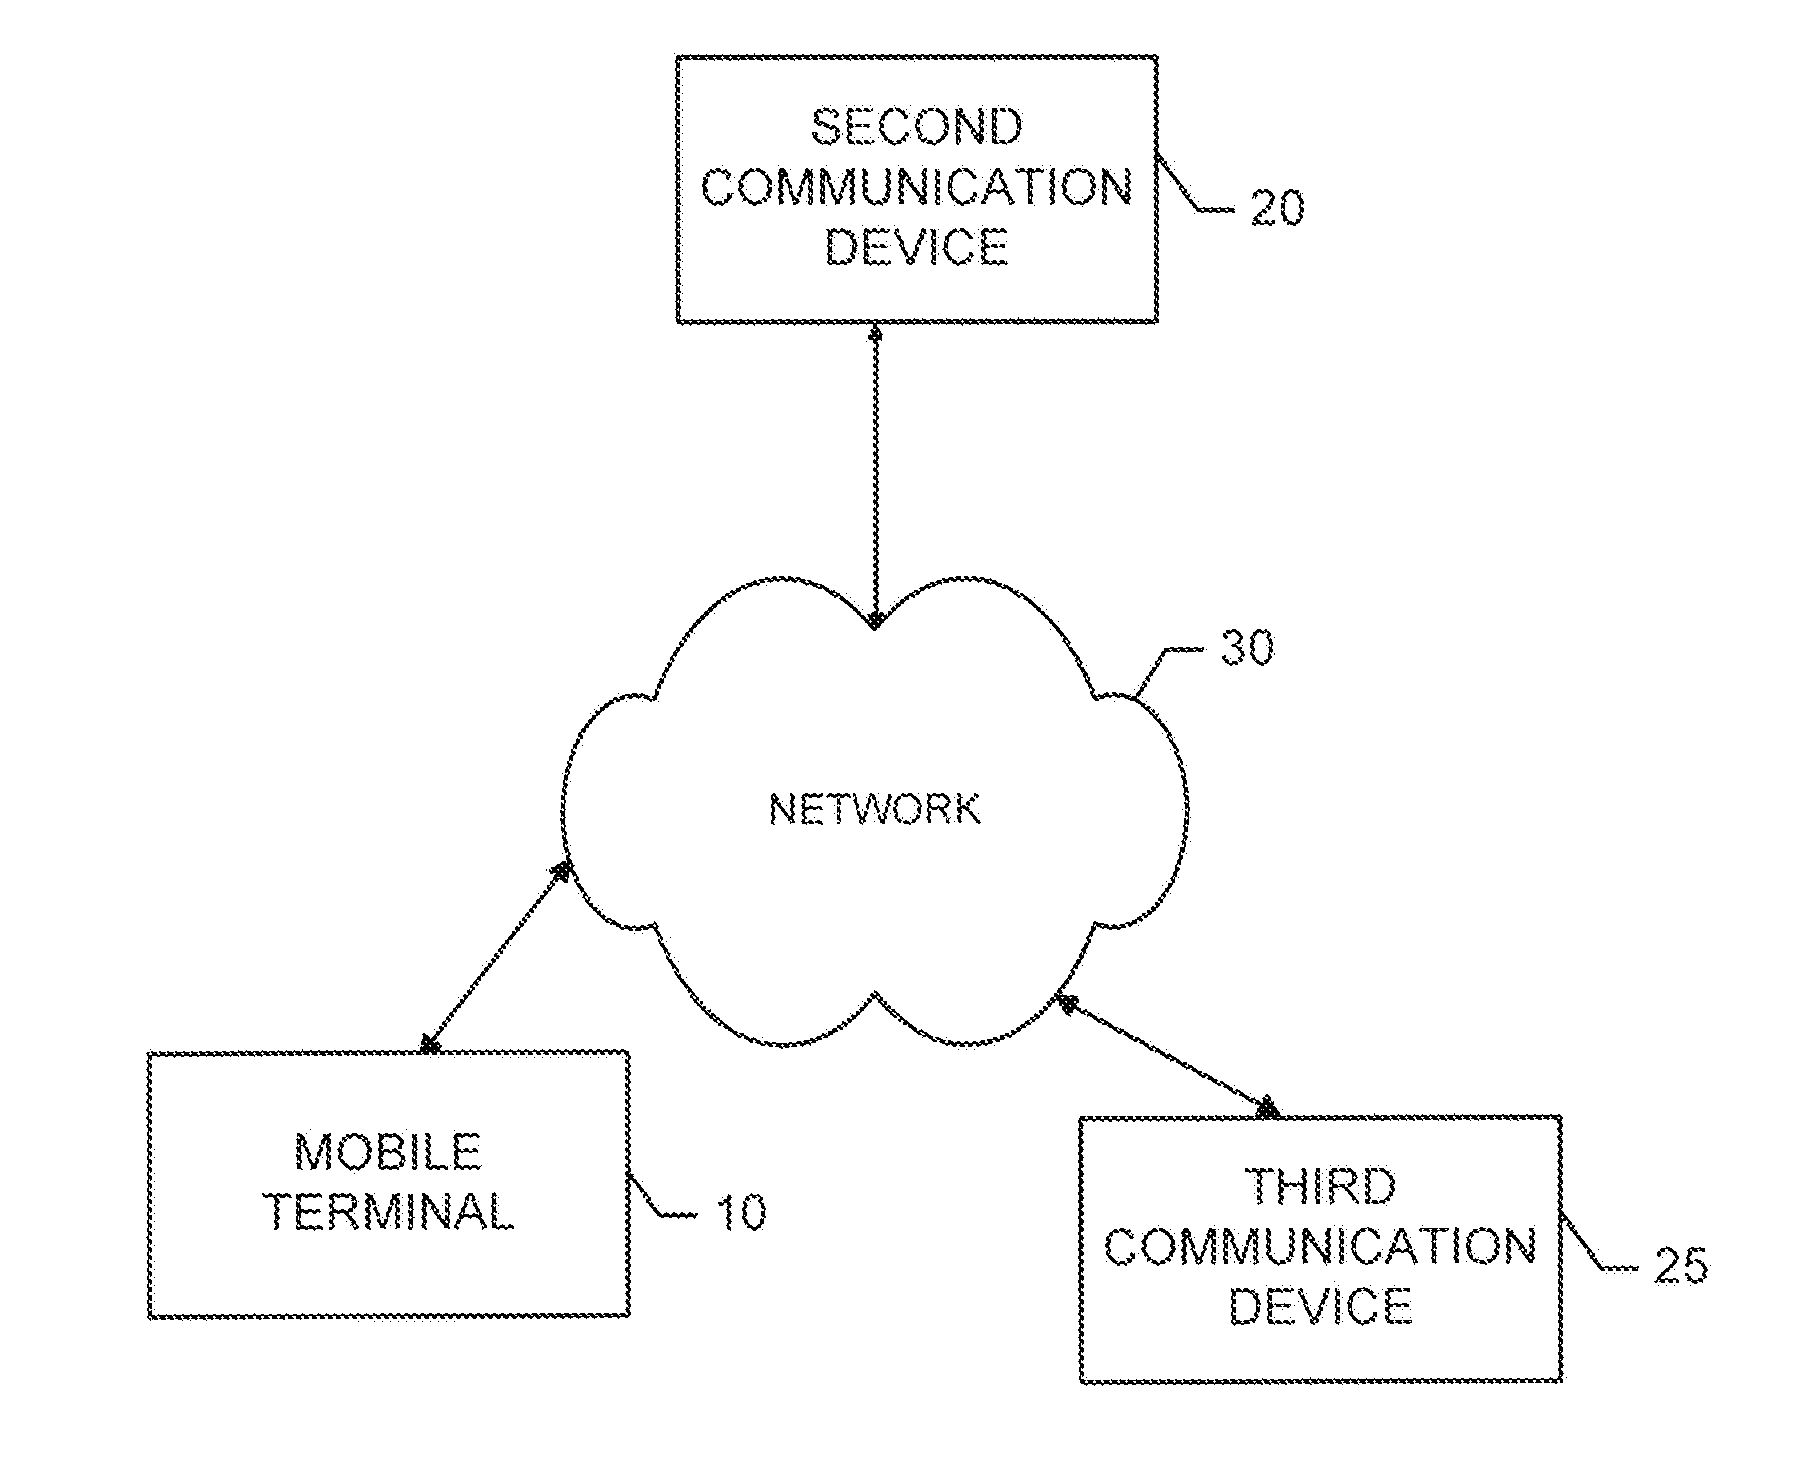 Method for managing device behavior during increased load or congestion using policies